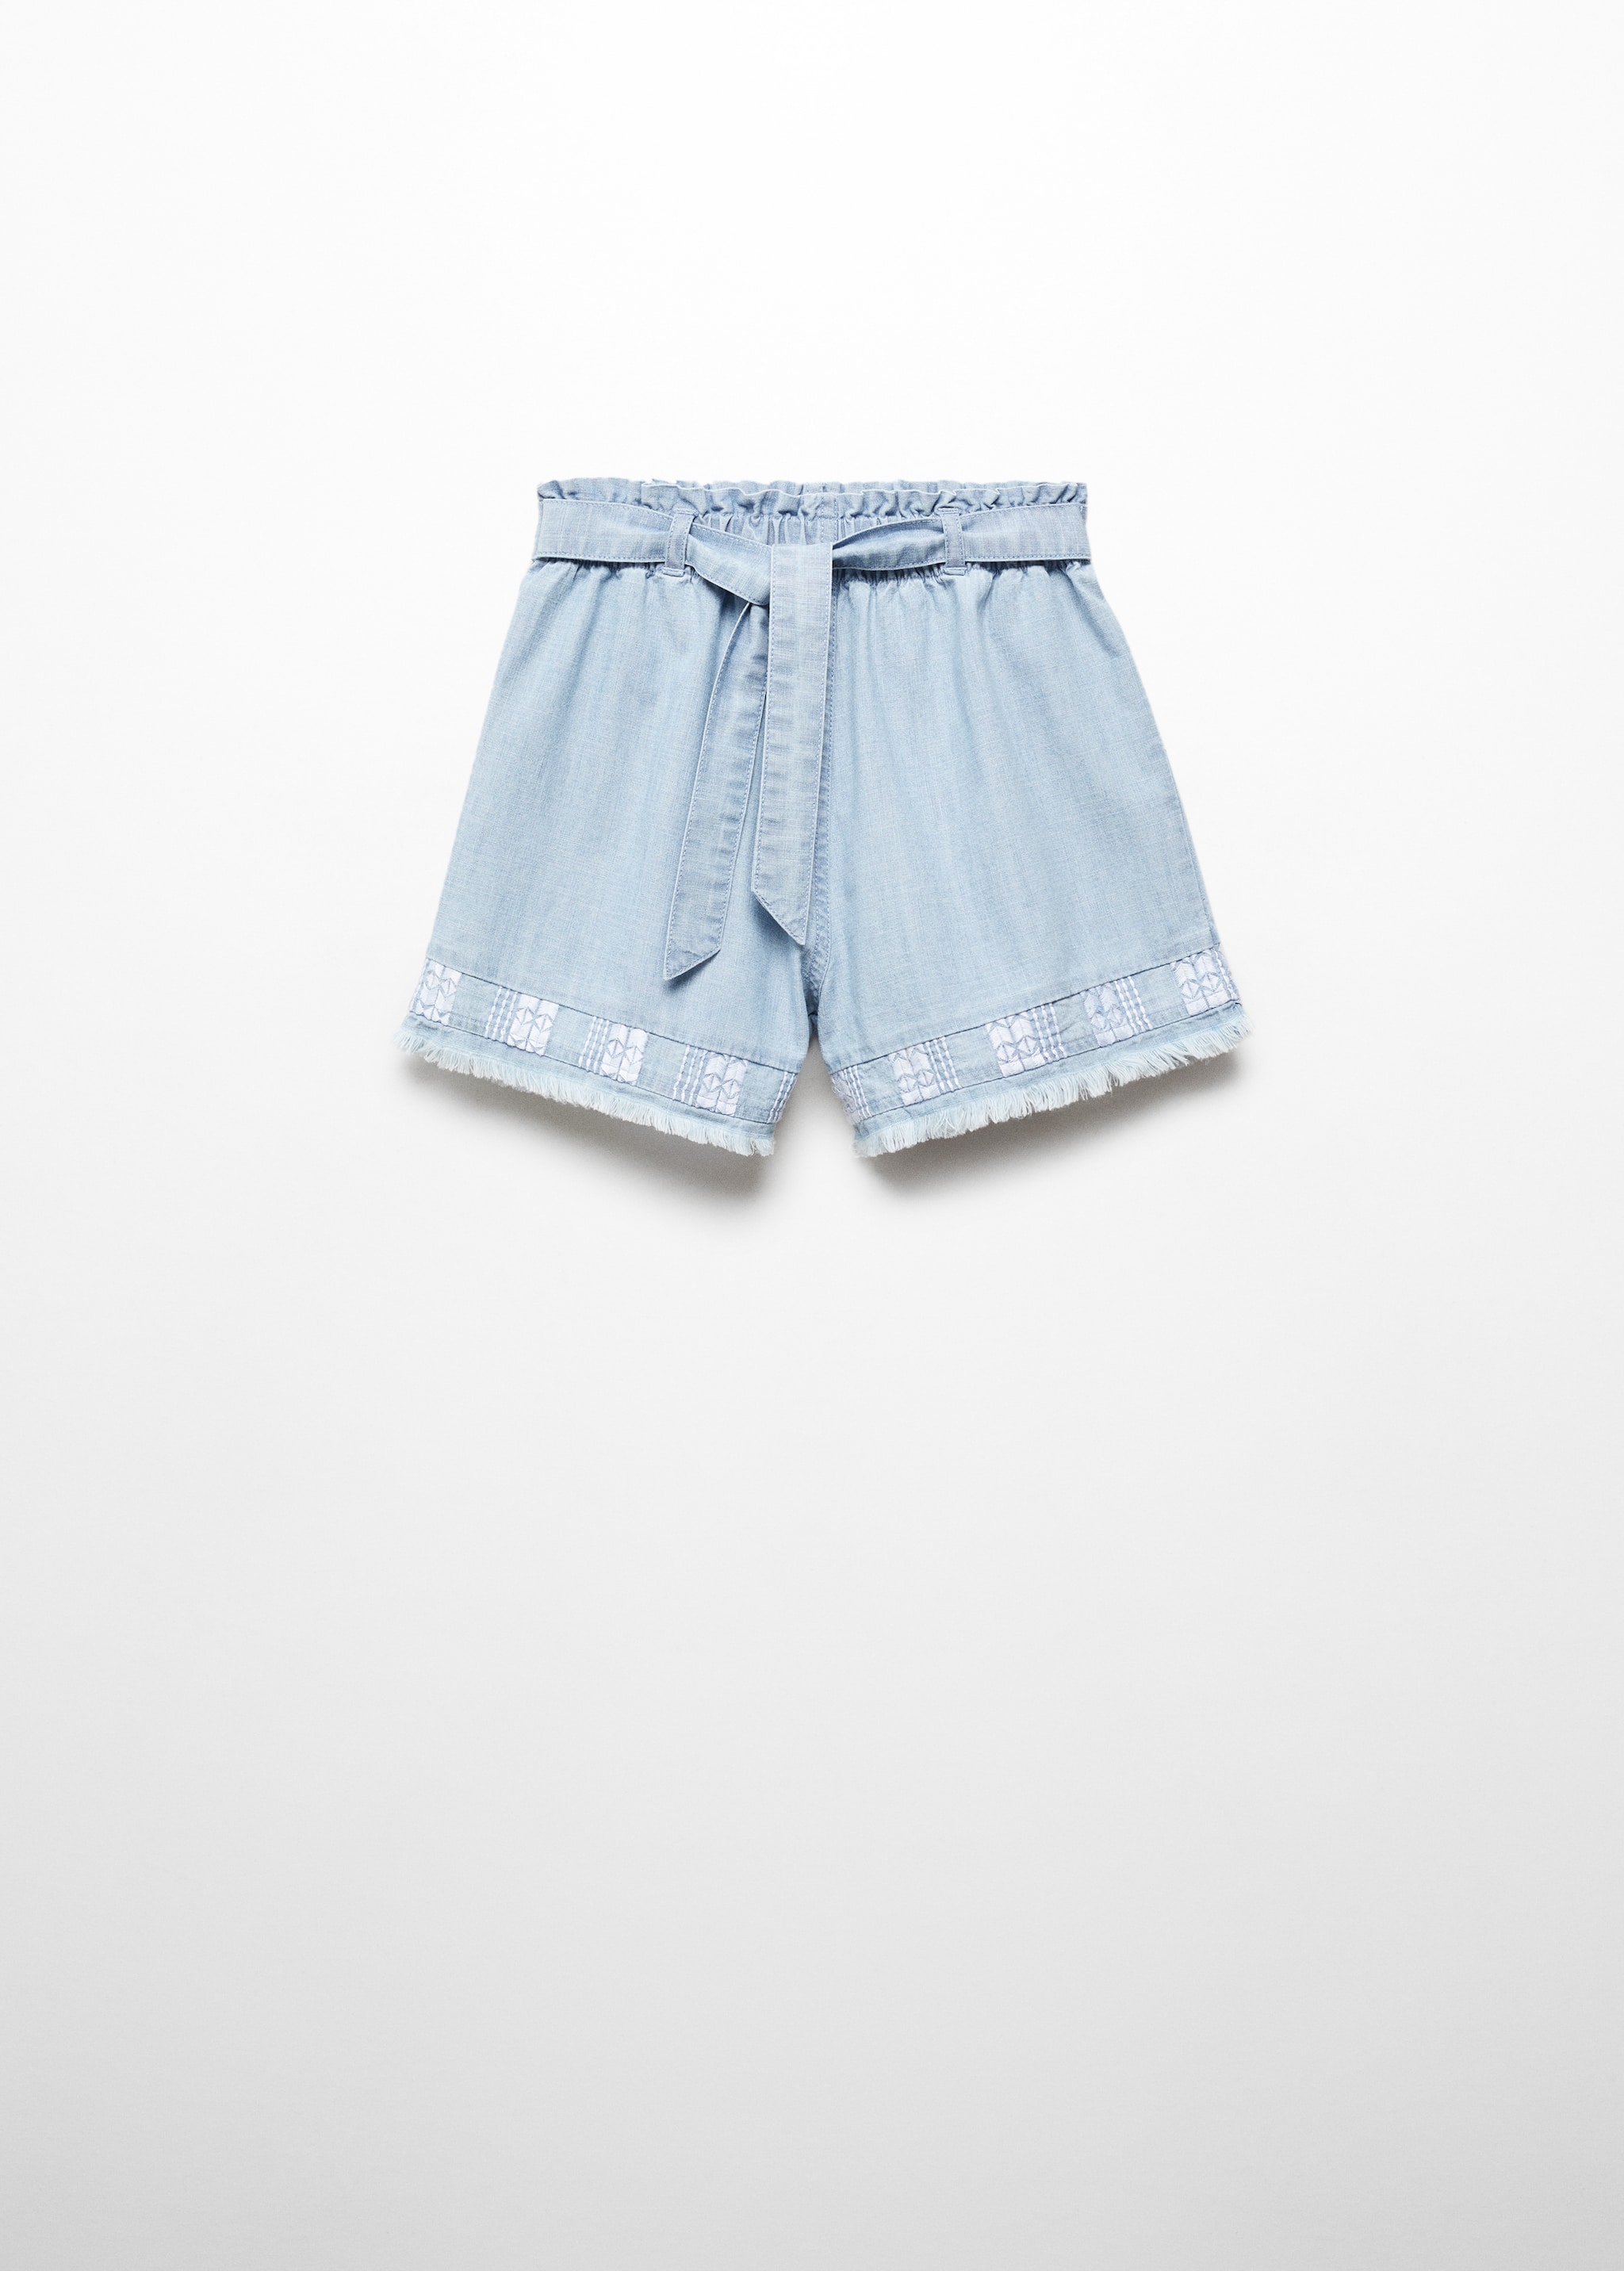 Fringed embroidery shorts - Article without model